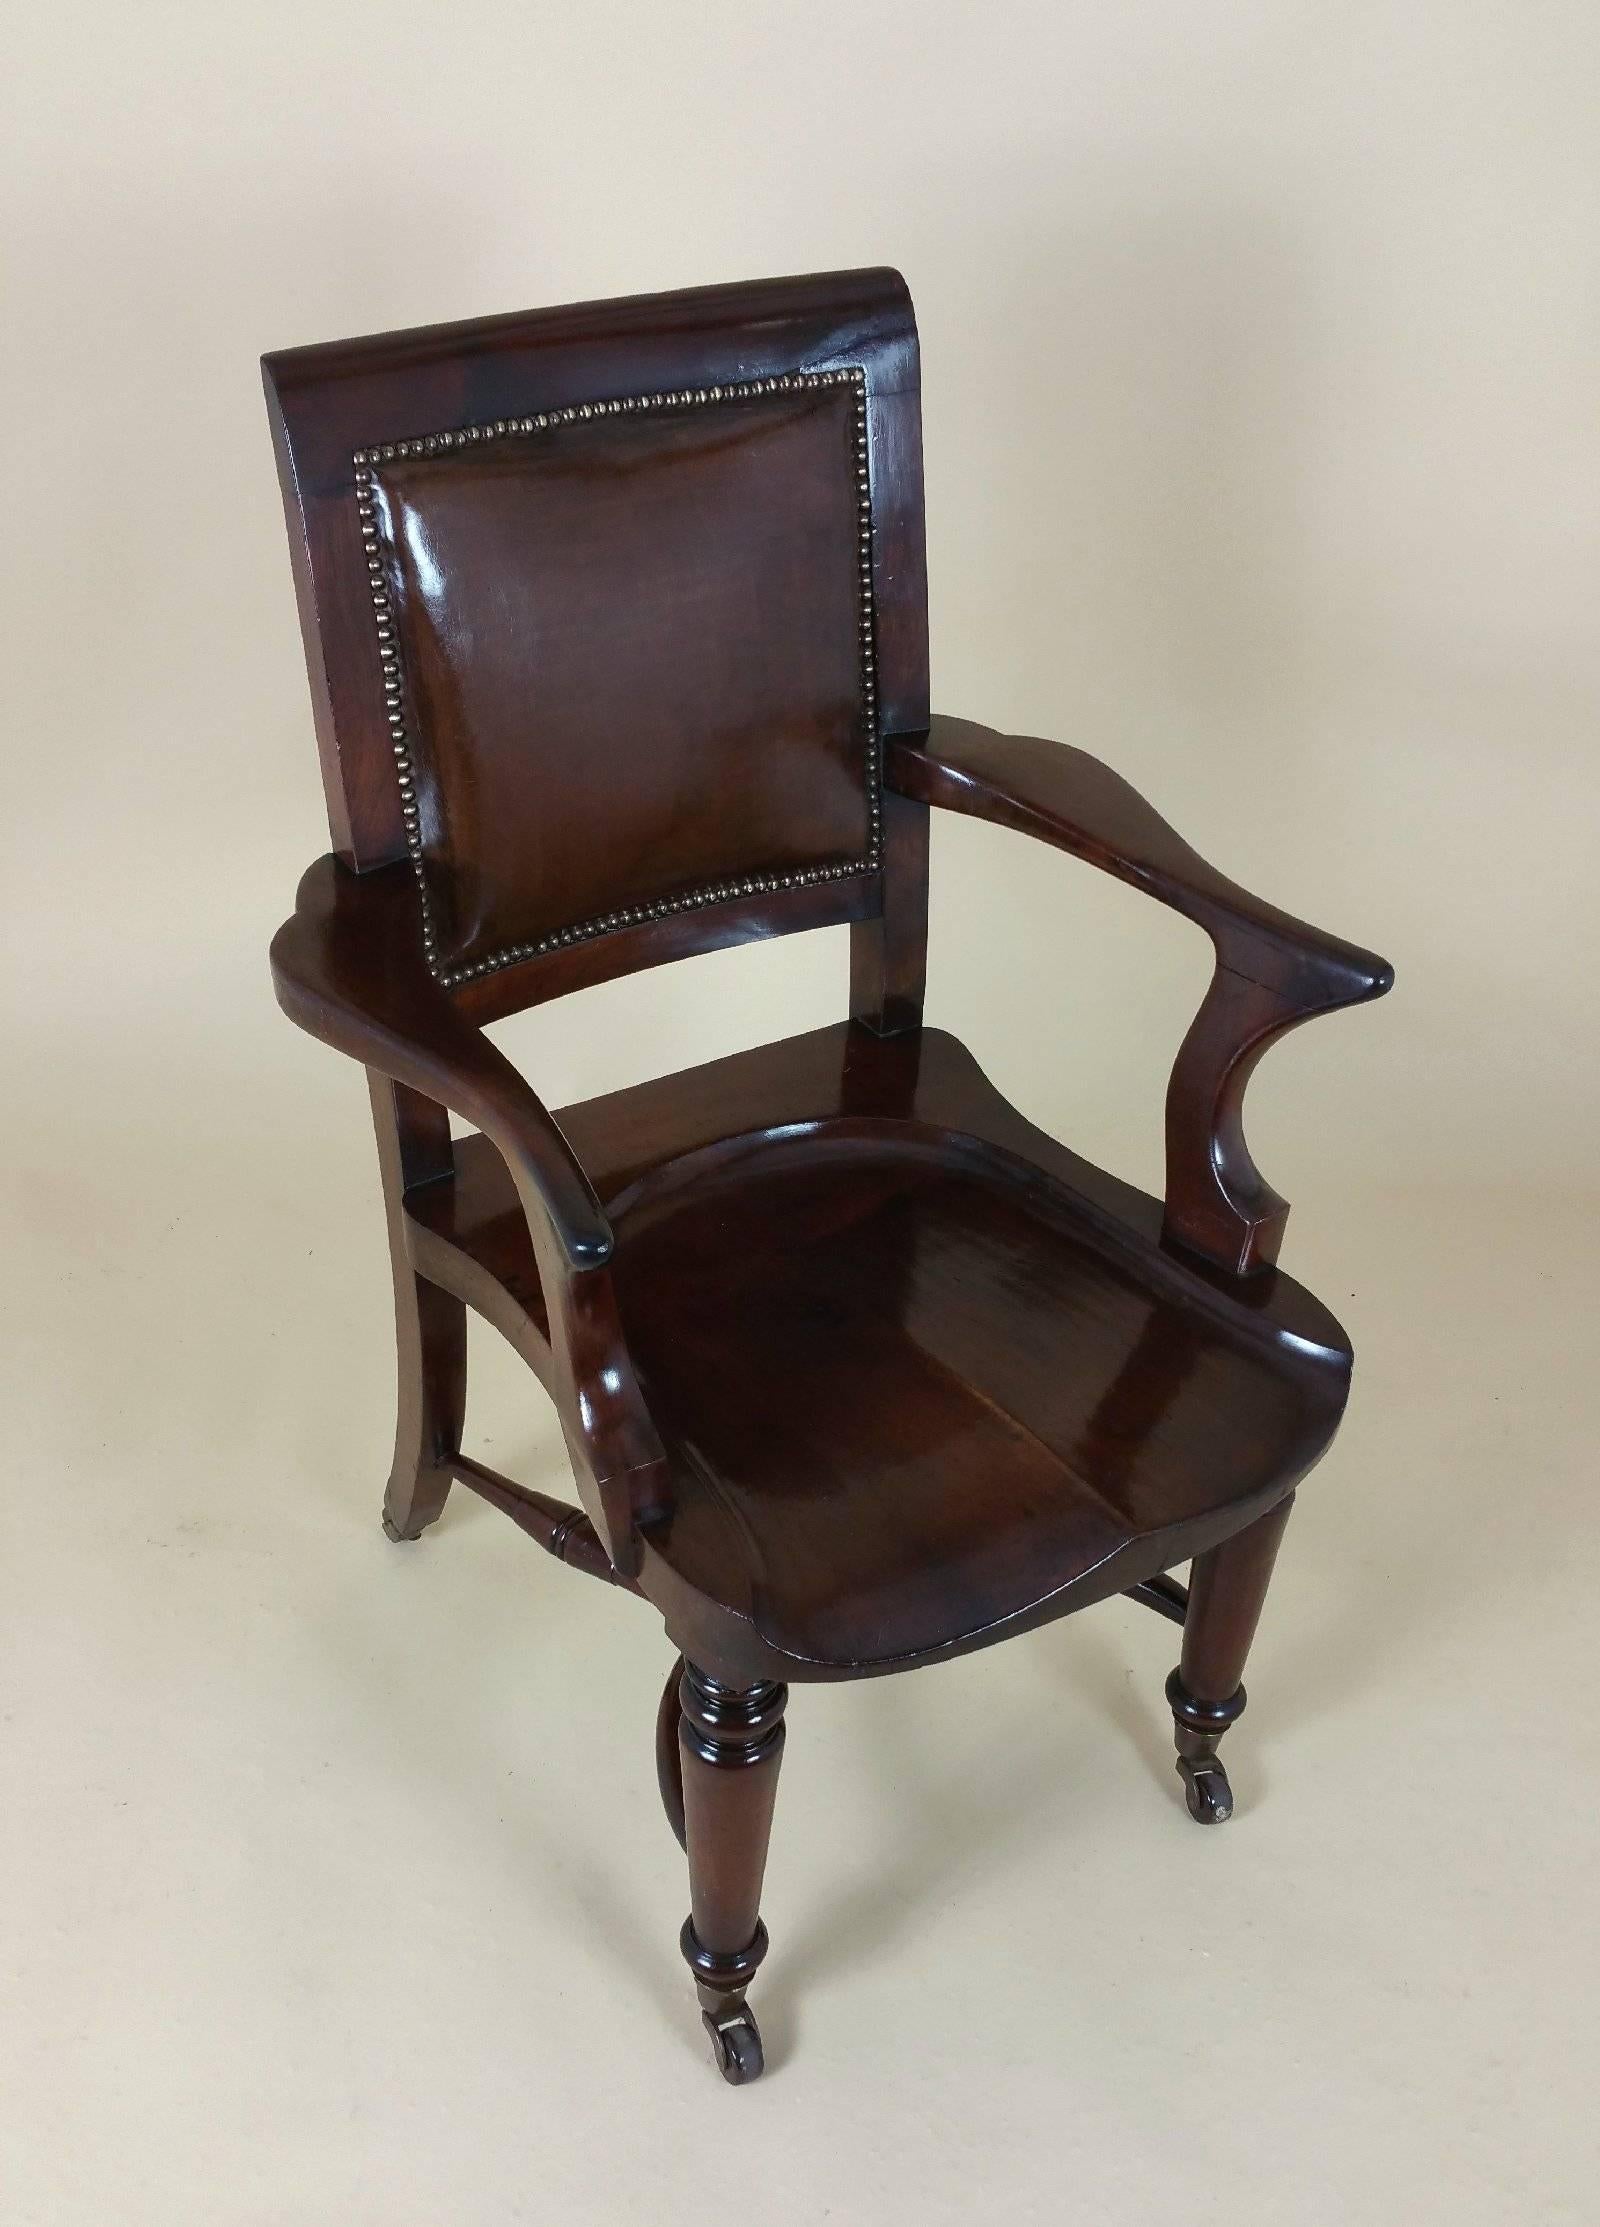 This gorgeous and superb quality Victorian mahogany desk chair features a solid, carved and shaped seat with an upholstered leather inset on the back and brass stud trim. The chair features swept back and turned front legs, all on brown ceramic